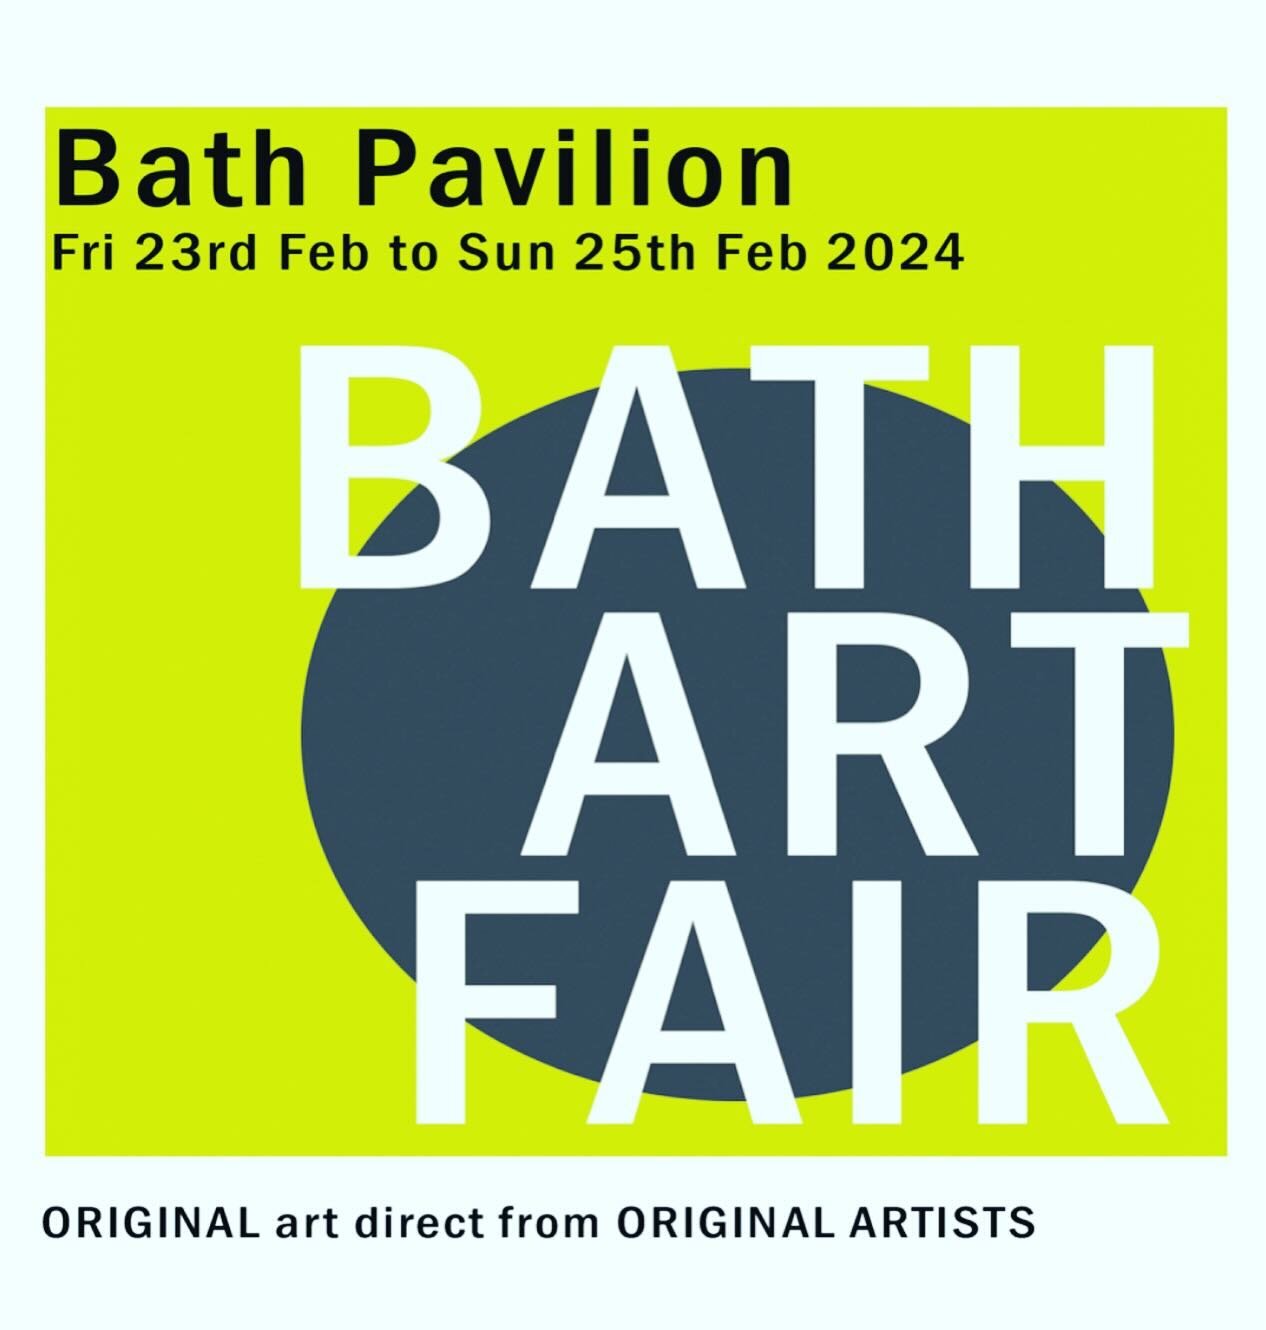 ROLL UP, ROLL UP//
Really looking forward to showing again @bathartfair later this month.
//
It was a great show for me last year and I&rsquo;m frantically trying to get some new, smaller work finished in time. Fingers crossed!
//
I hear ticket sales